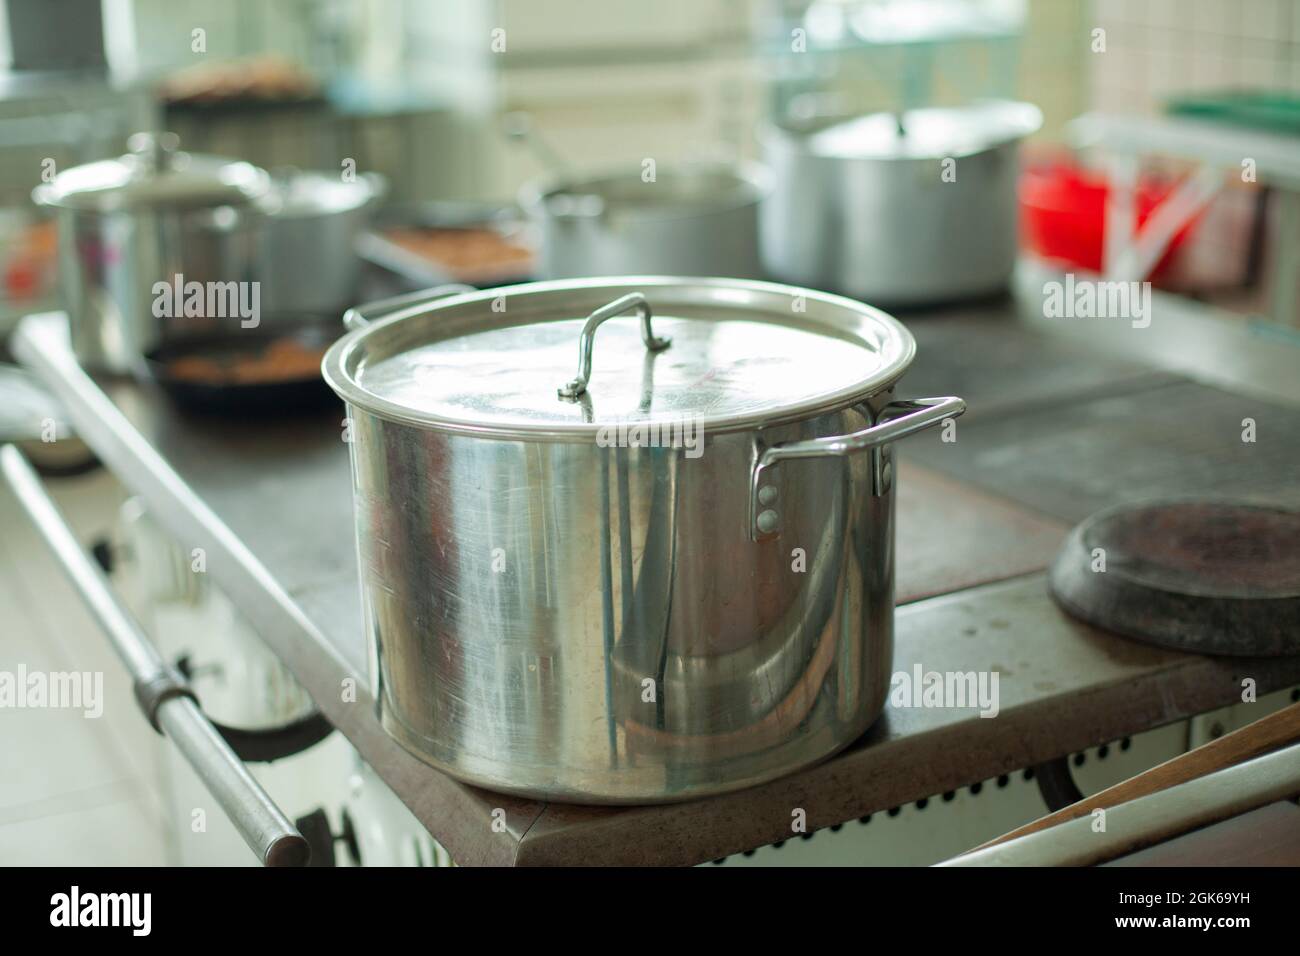 https://c8.alamy.com/comp/2GK69YH/large-pot-for-cooking-kitchen-utensils-in-the-dining-room-stainless-steel-water-tank-dishes-in-the-kitchen-2GK69YH.jpg